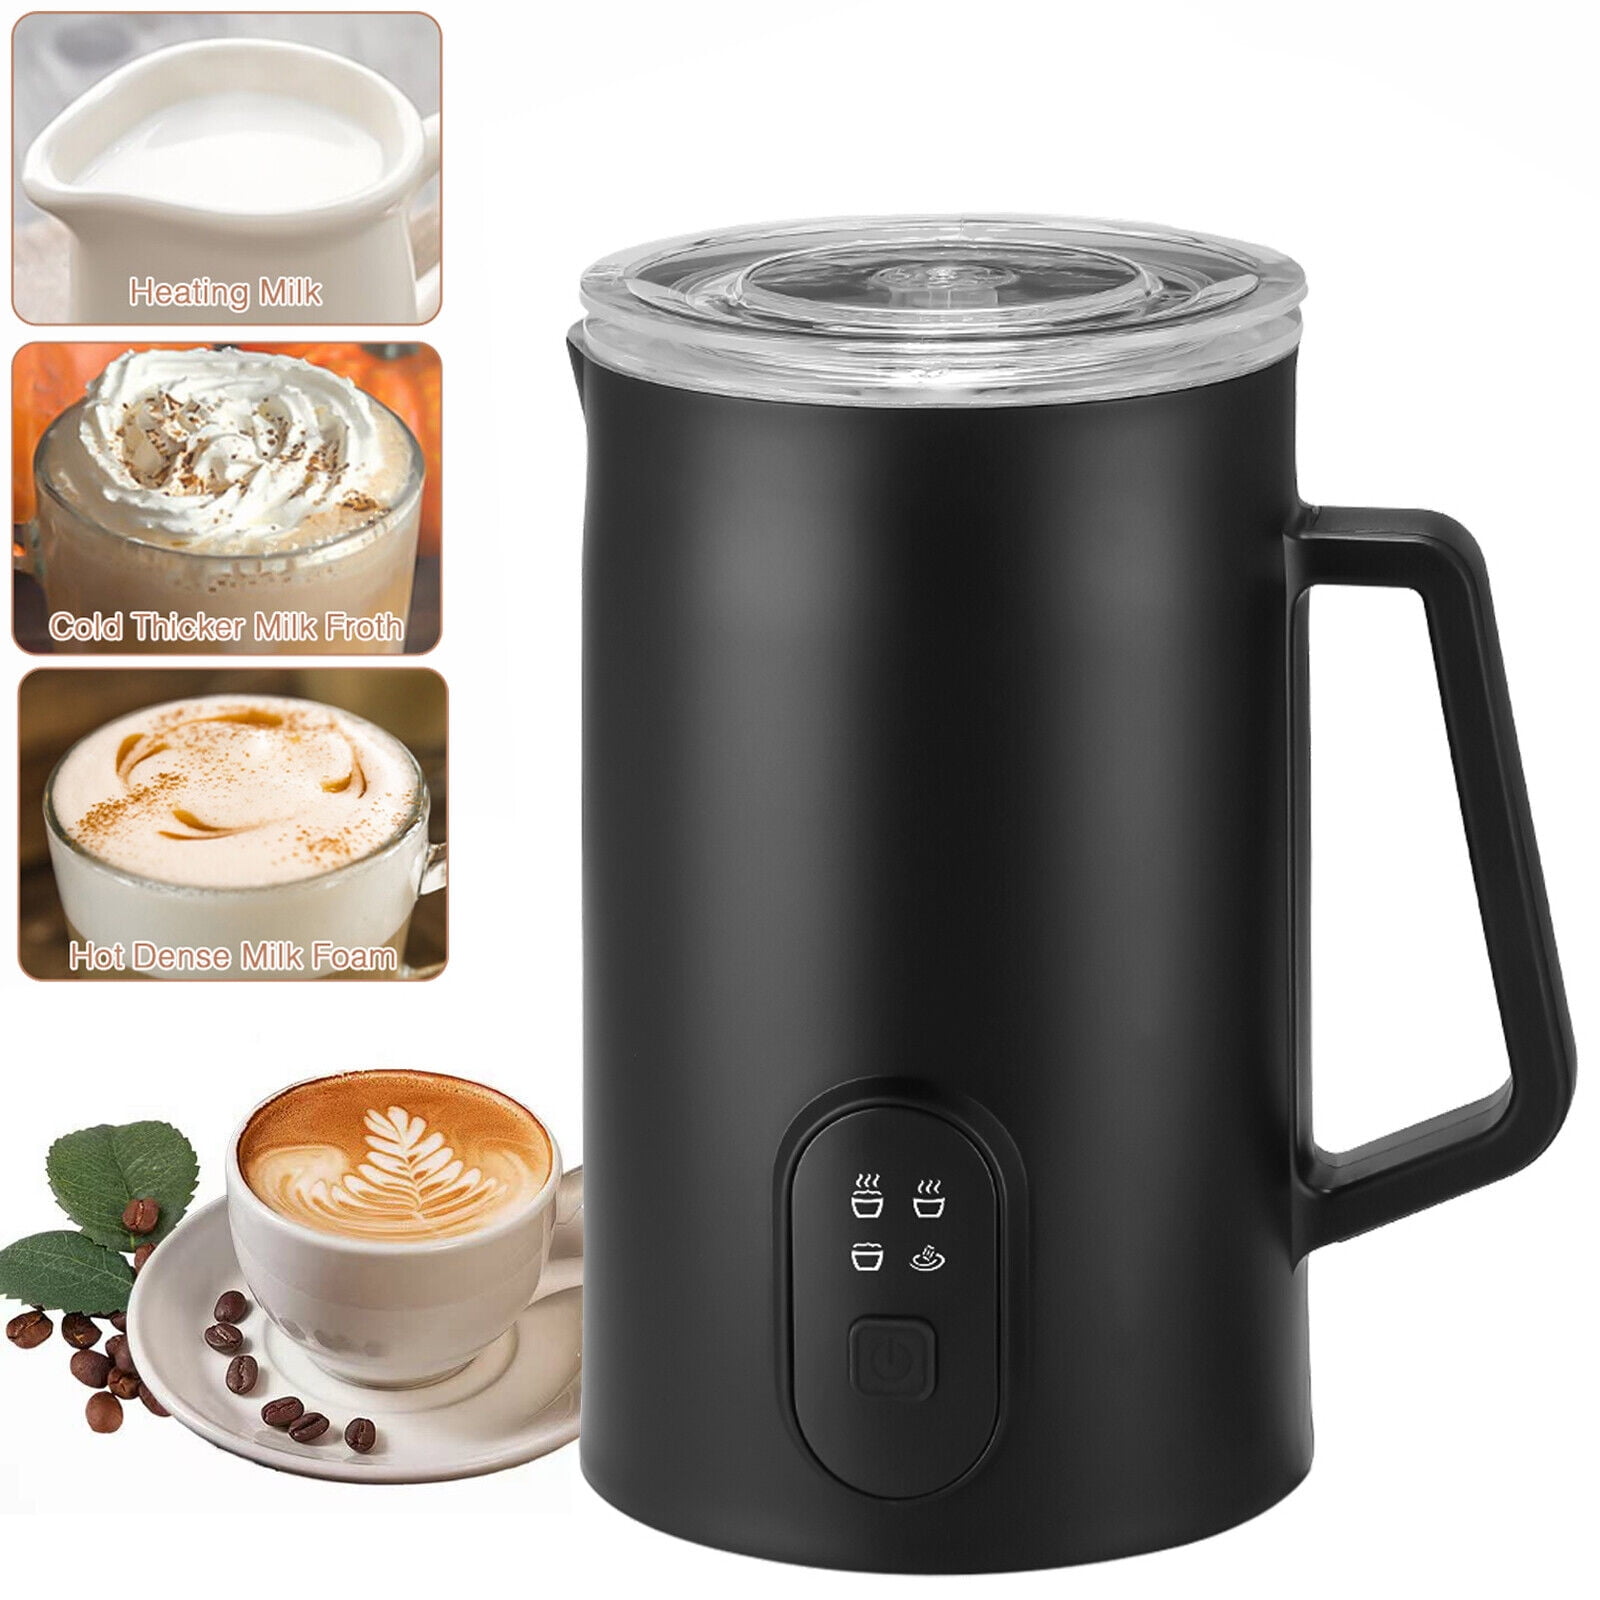 CACAGOO 8.5oz Electric Milk Frother and Steamer, 4 in 1 Milk Steamer for  Latte, Cappuccinos, Macchiato, Drinks 